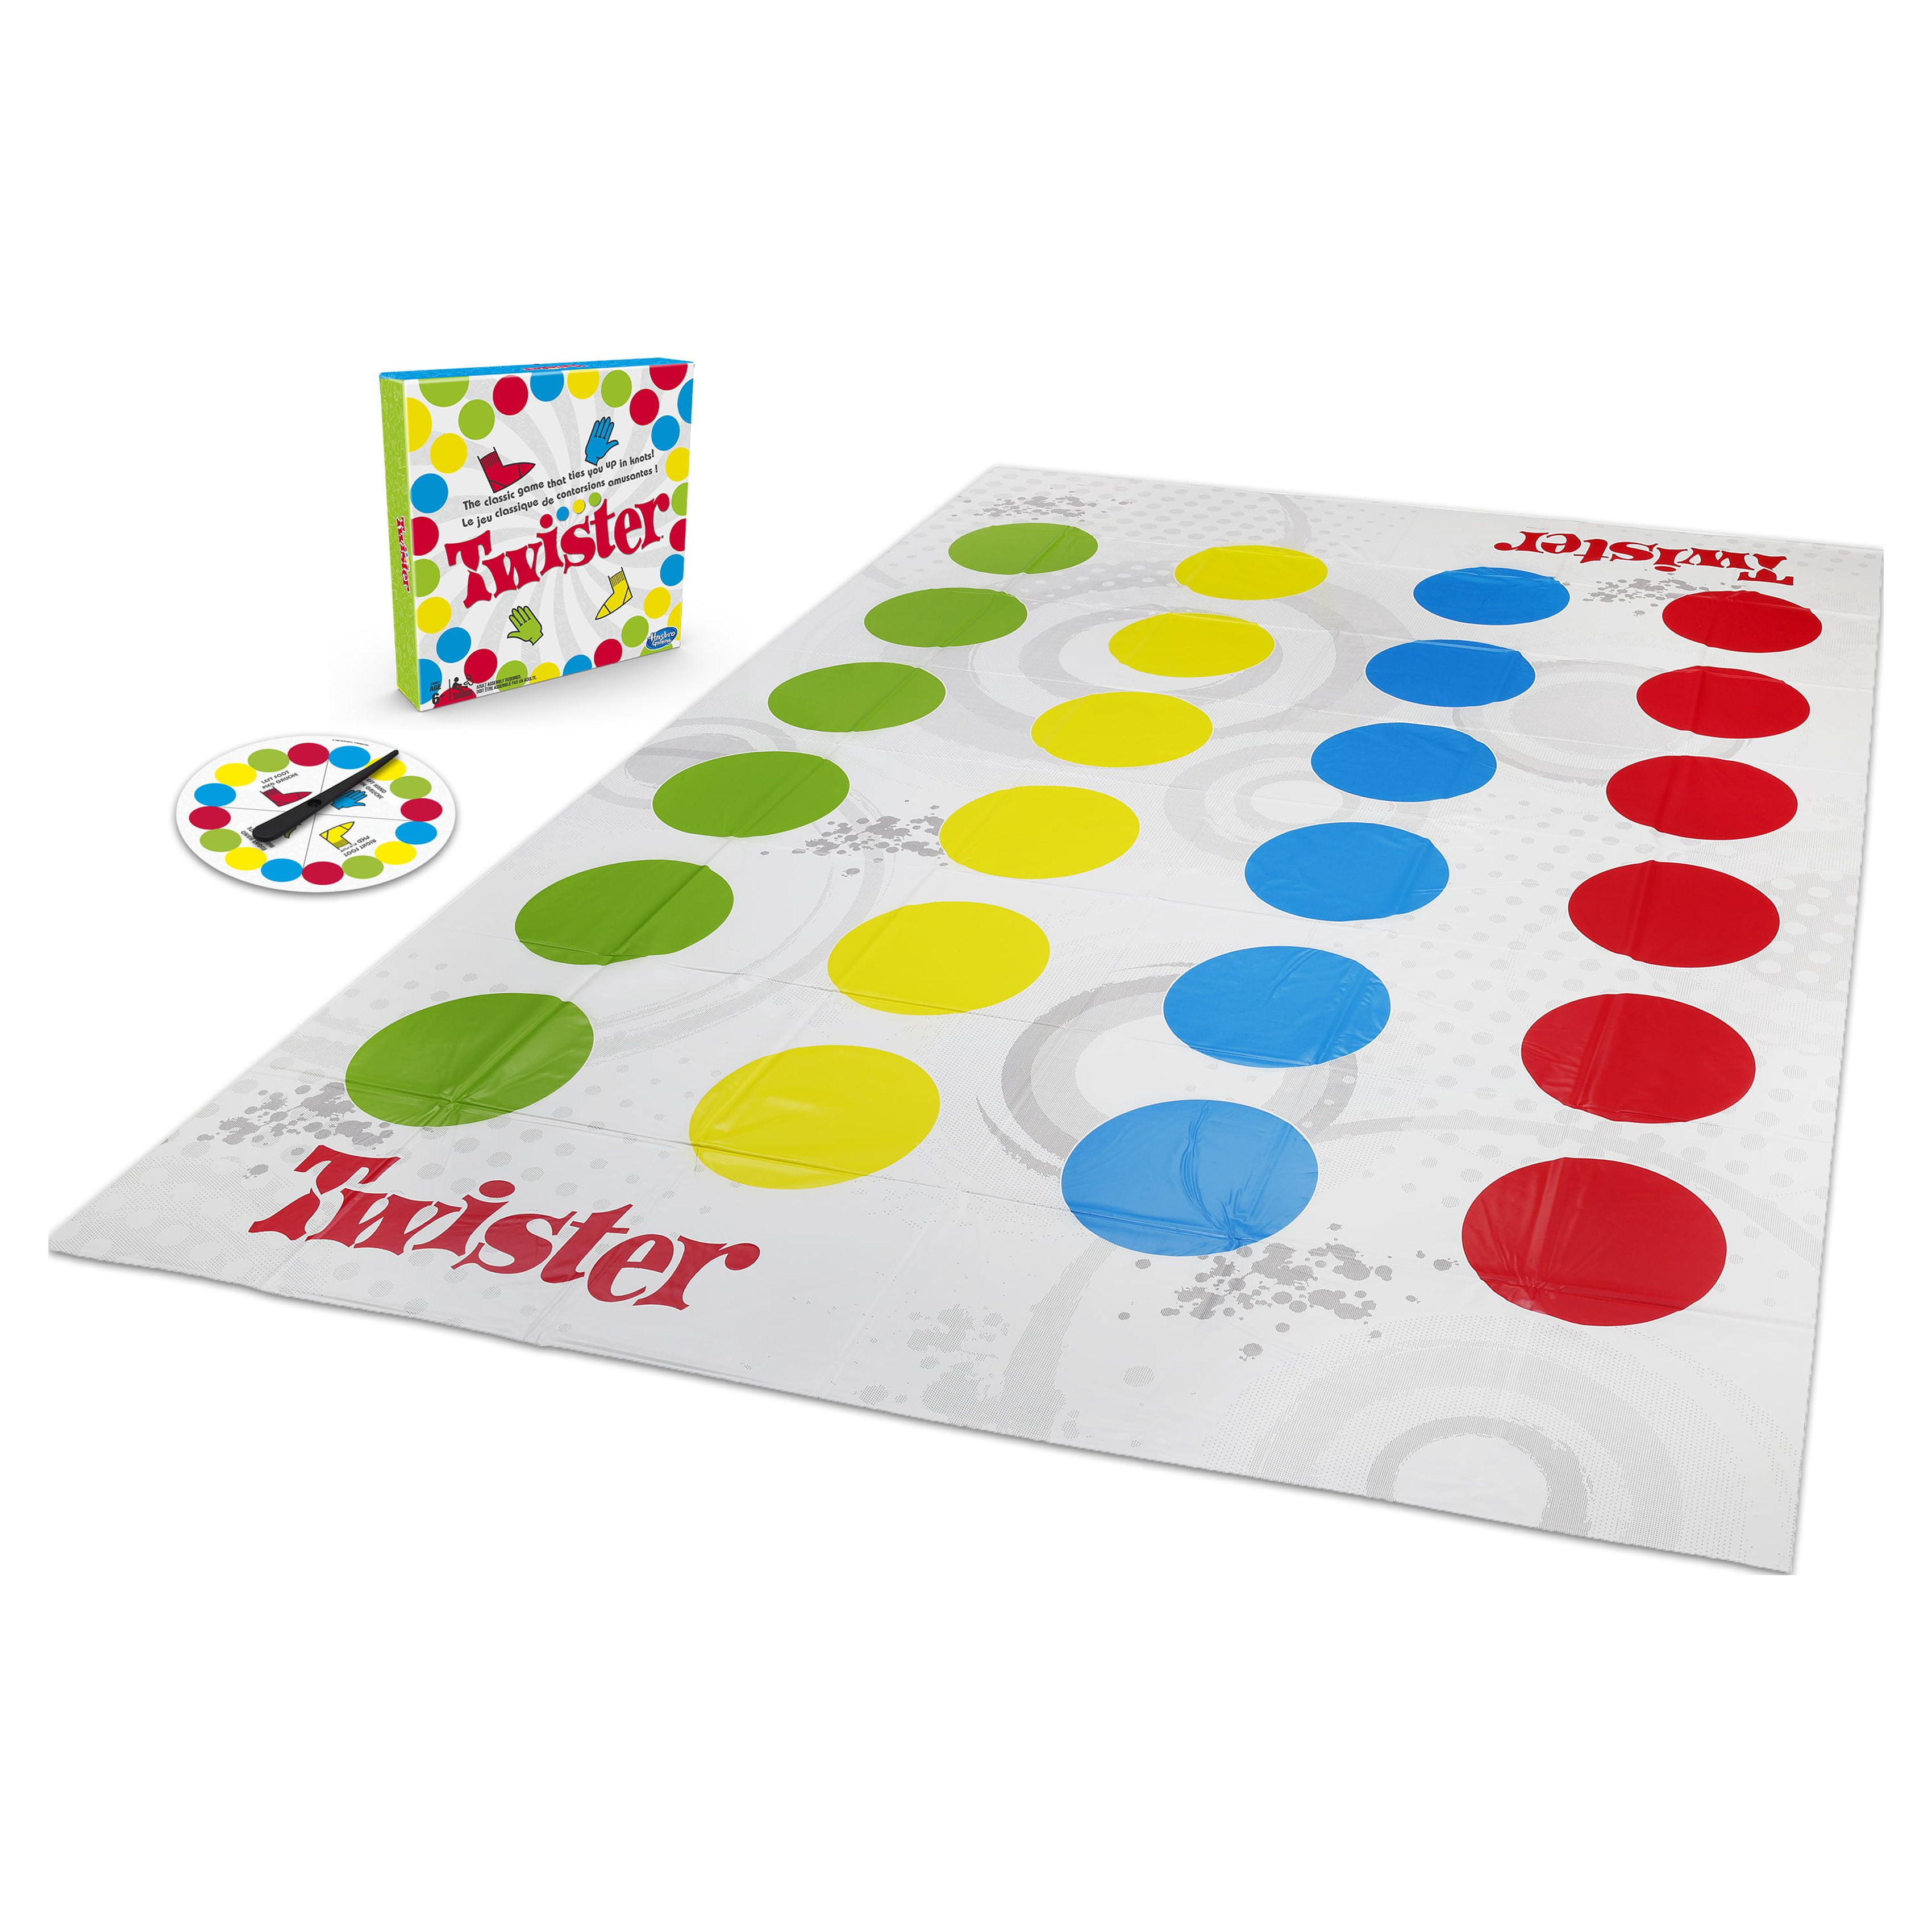 Twister Air Party Game : Target